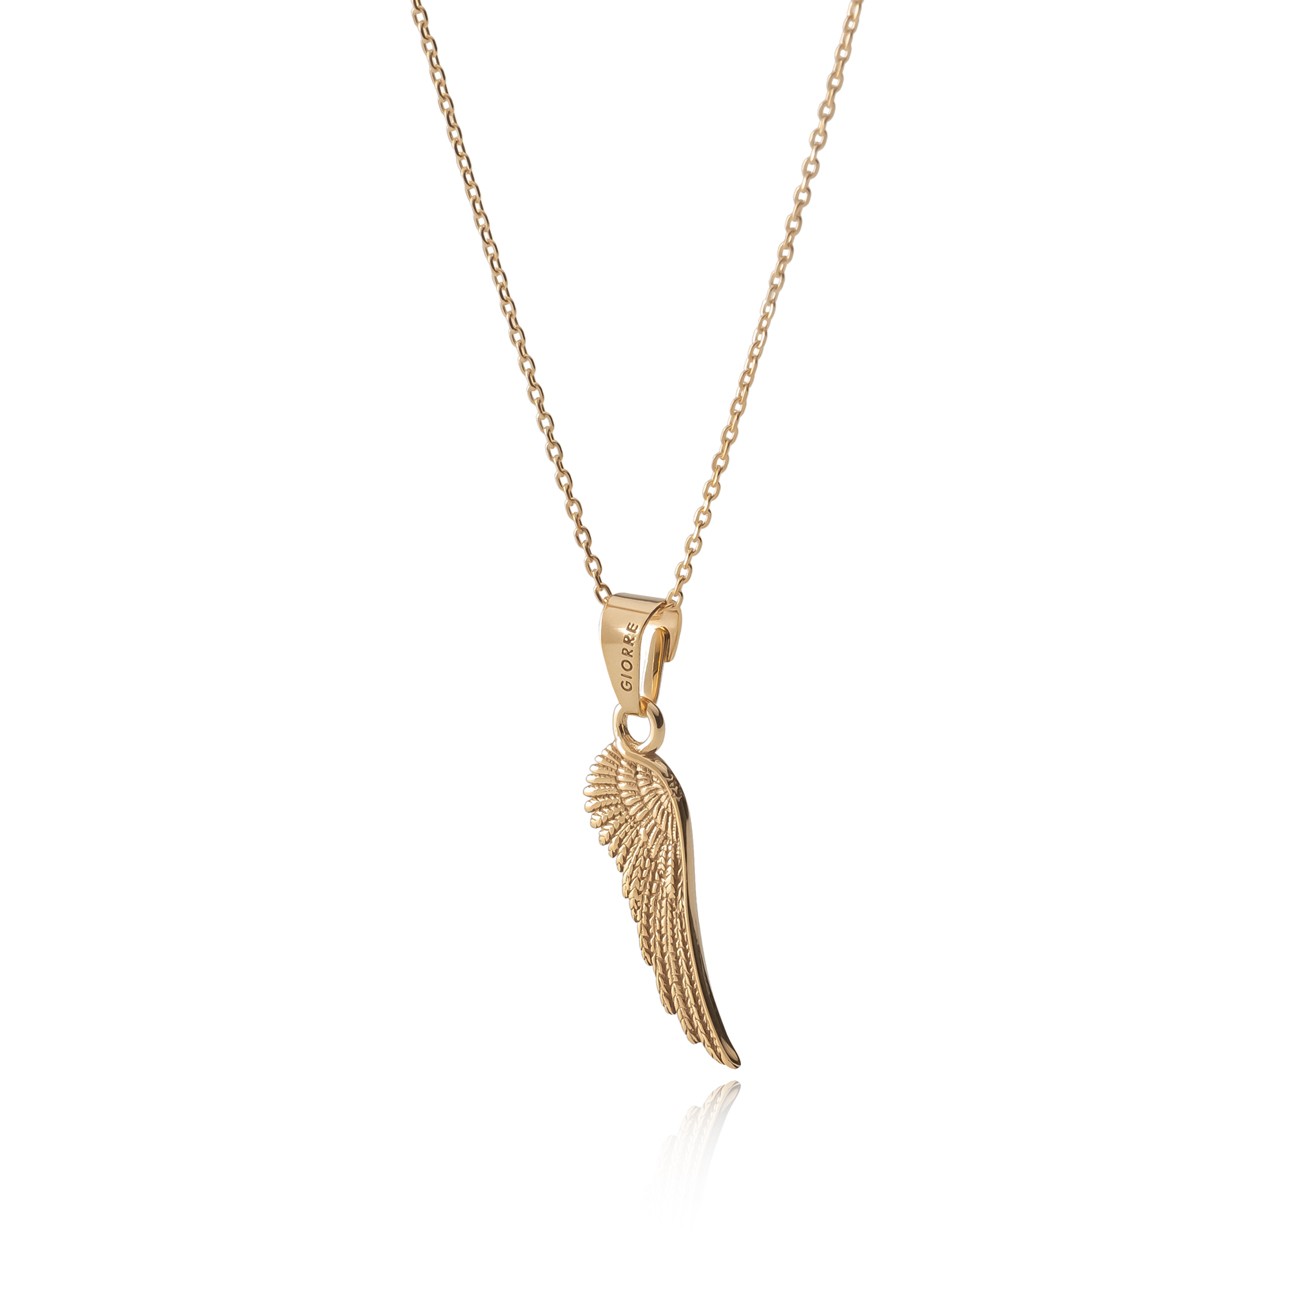 Gold wing necklace, gold 14K